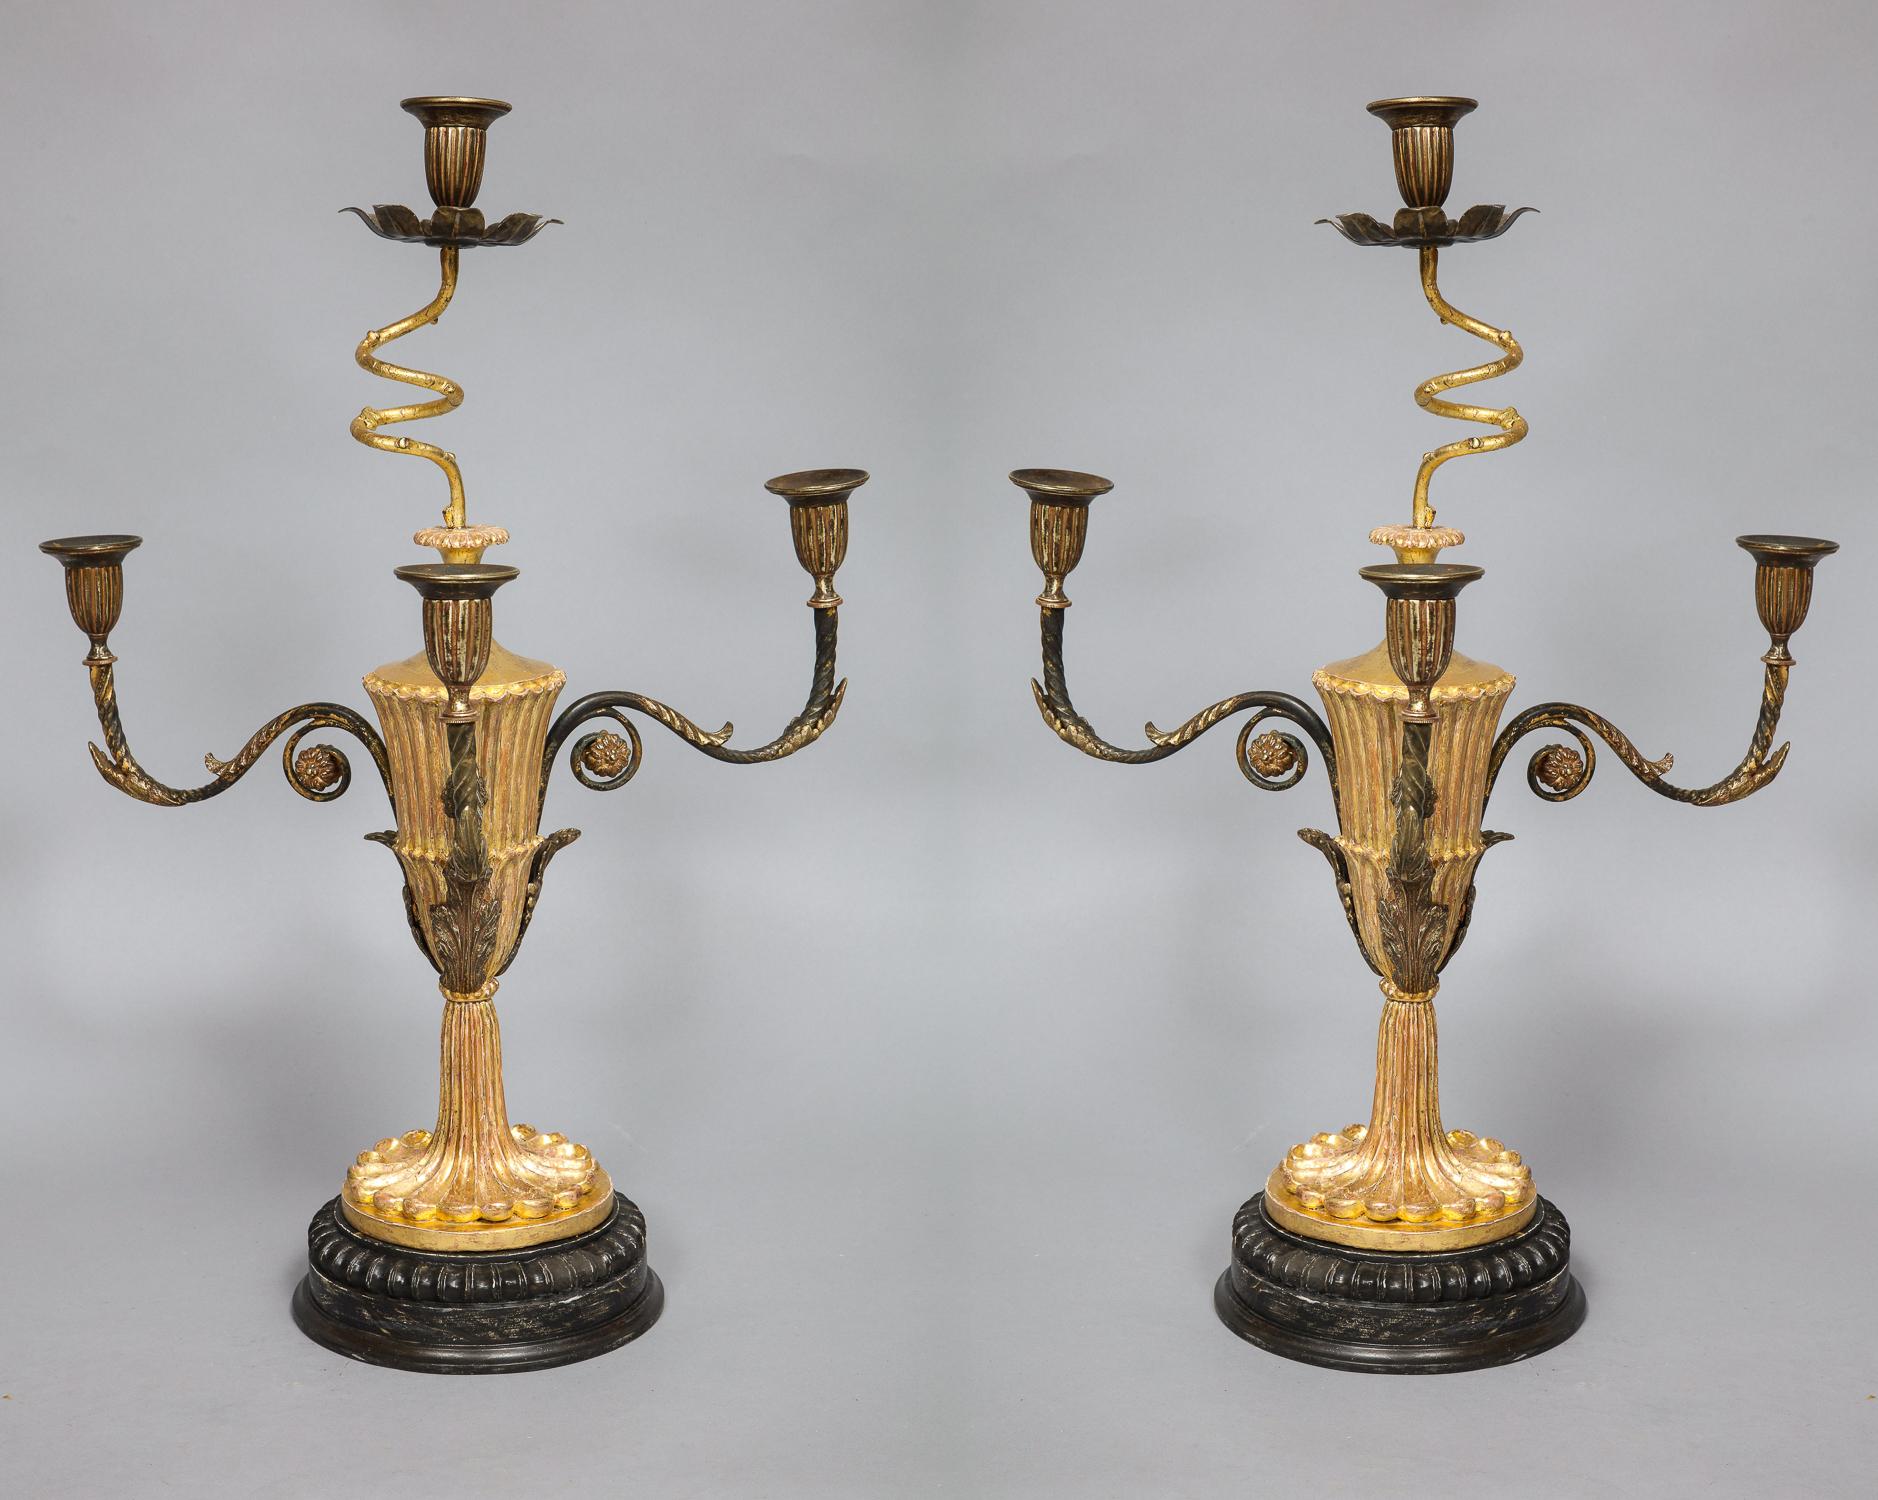 Fine pair of George III carved and giltwood candelabra in the manner of Thomas Chippendale the Younger, the four candle sockets with ribbed sides, the central arm with corkscrew shaft having later drip pan, the three side lights with fire gilt brass